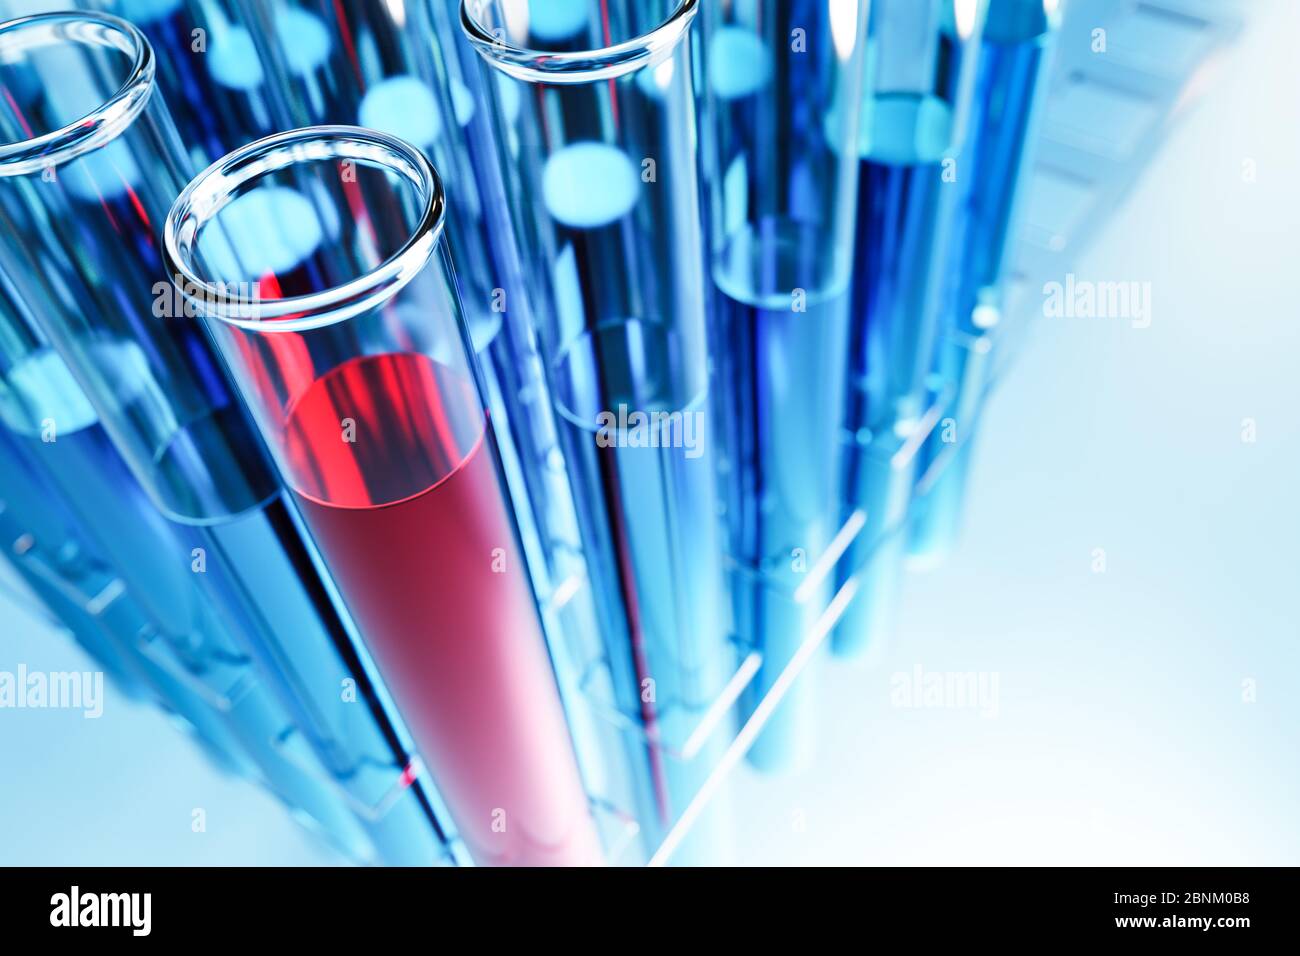 Test tubes with red or blue liquid in a holder. Testing laboratory, covid-19 test, chemical testing facility, medical testing. Wide angle perspective Stock Photo